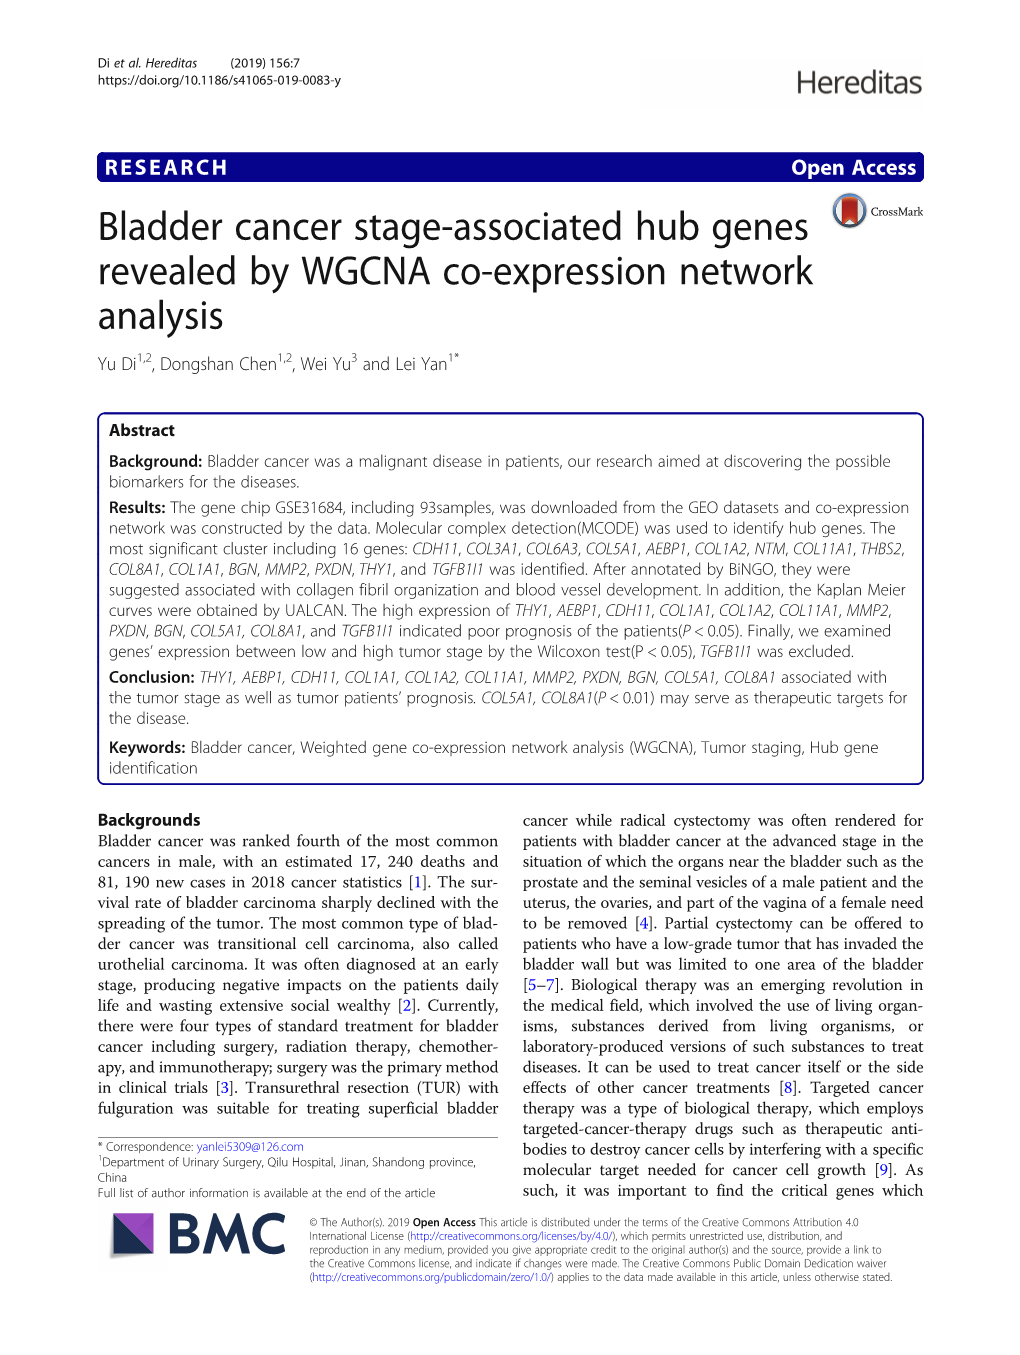 Bladder Cancer Stage-Associated Hub Genes Revealed by WGCNA Co-Expression Network Analysis Yu Di1,2, Dongshan Chen1,2, Wei Yu3 and Lei Yan1*